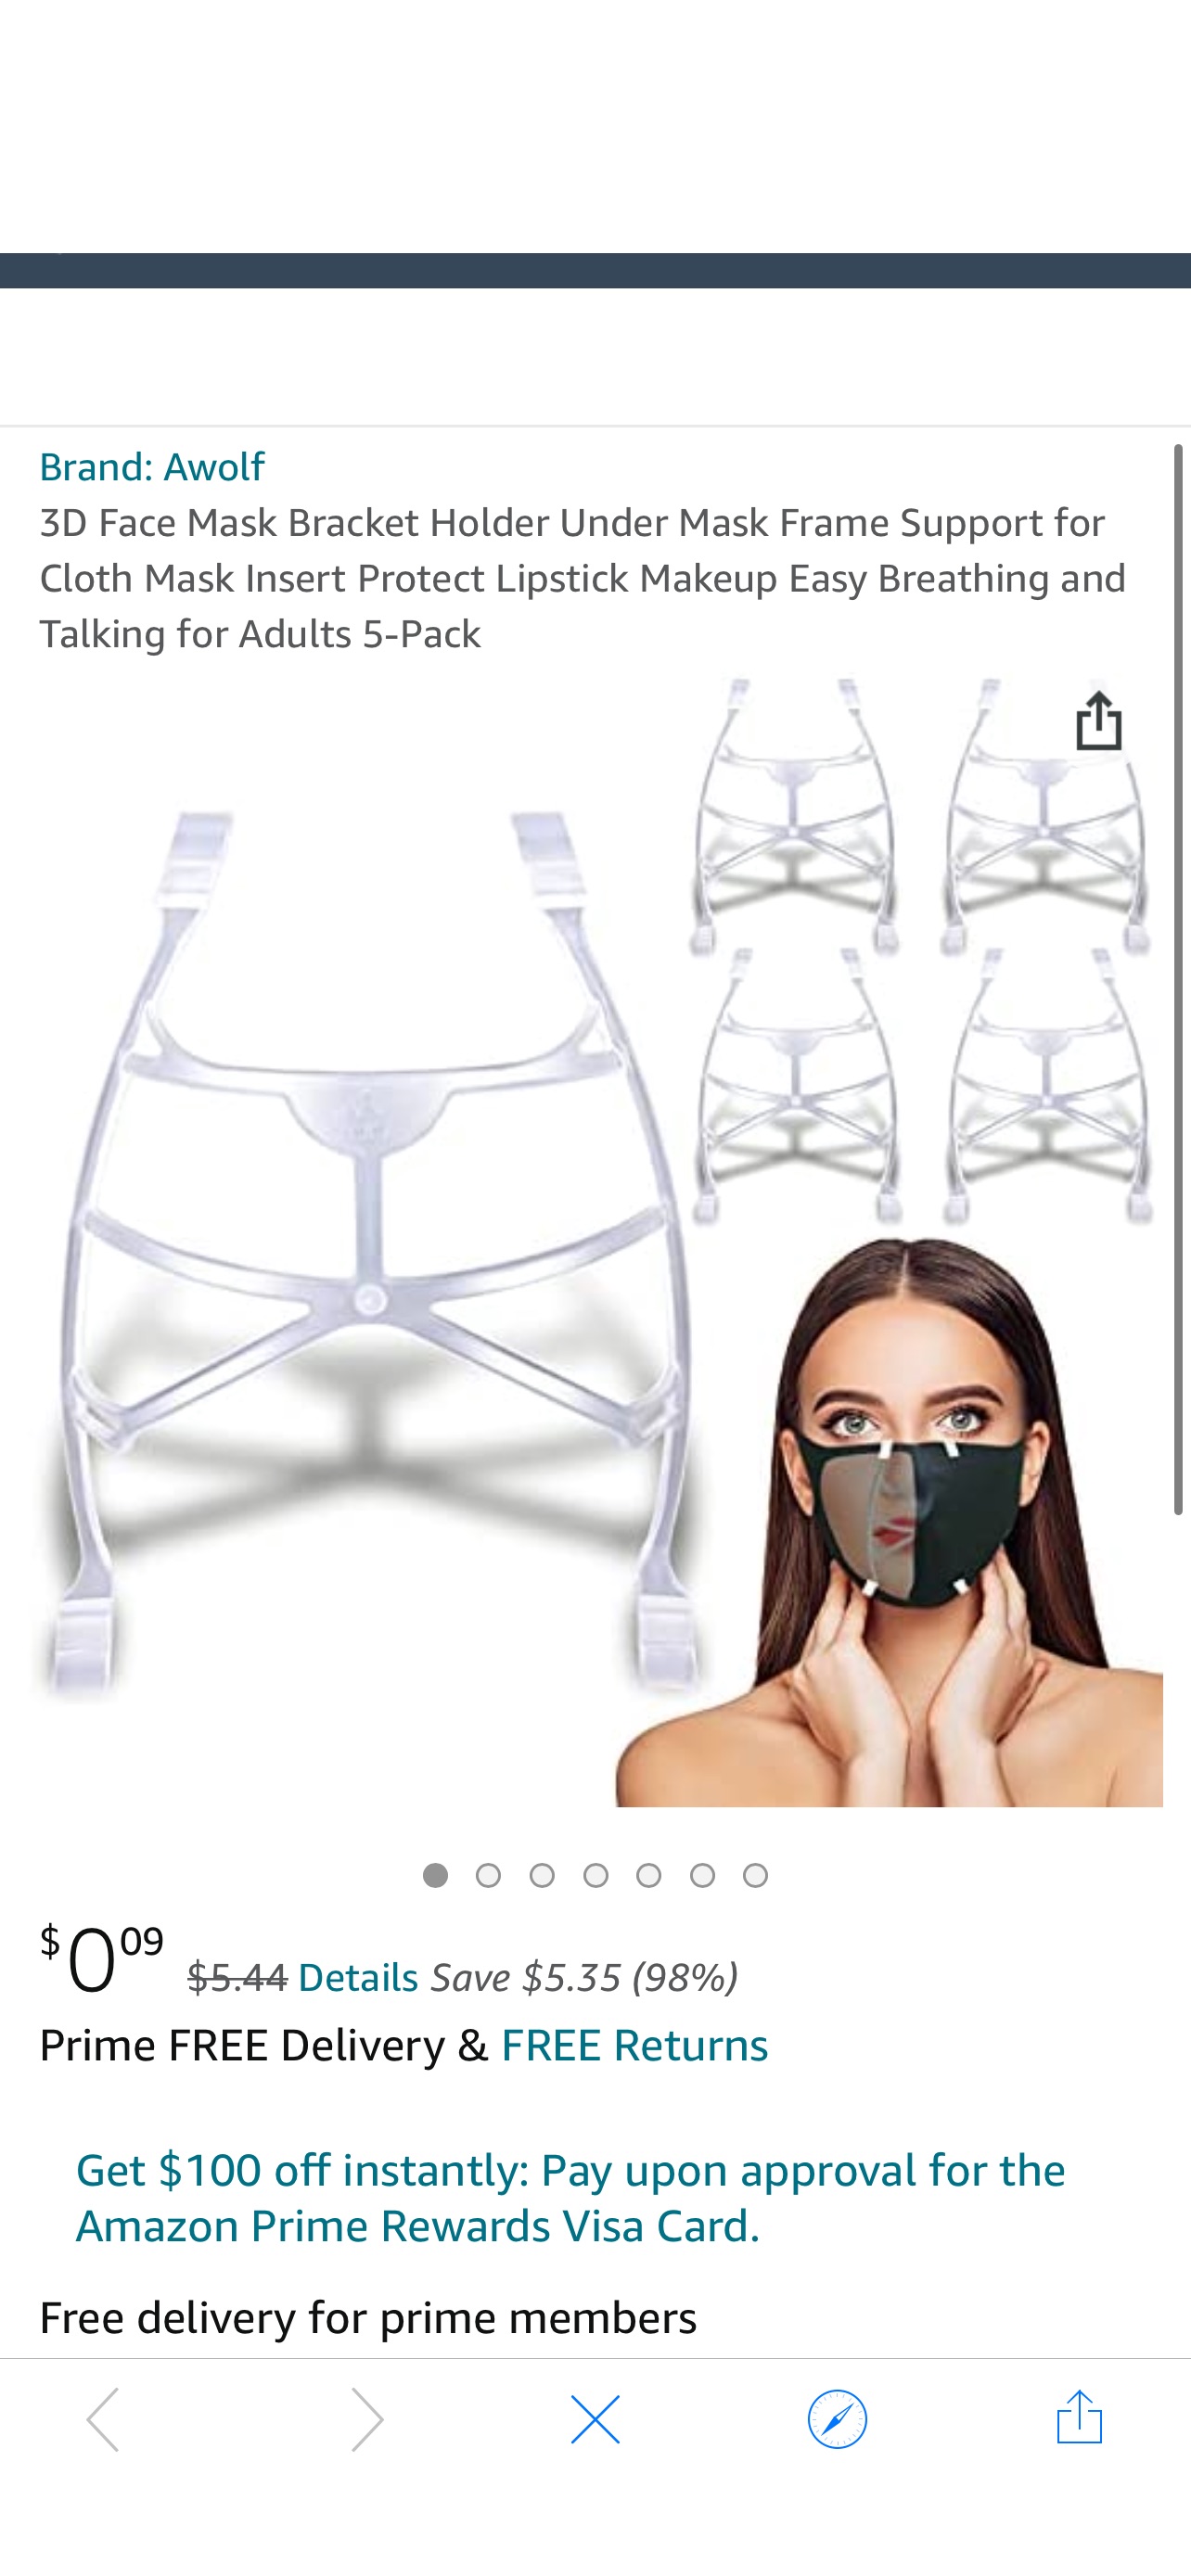 Amazon.com : 3D Face Mask 口罩架Bracket Holder Under Mask Frame Support for Cloth Mask Insert Protect Lipstick Makeup Easy Breathing and Talking for Adults 5-Pack : Beauty